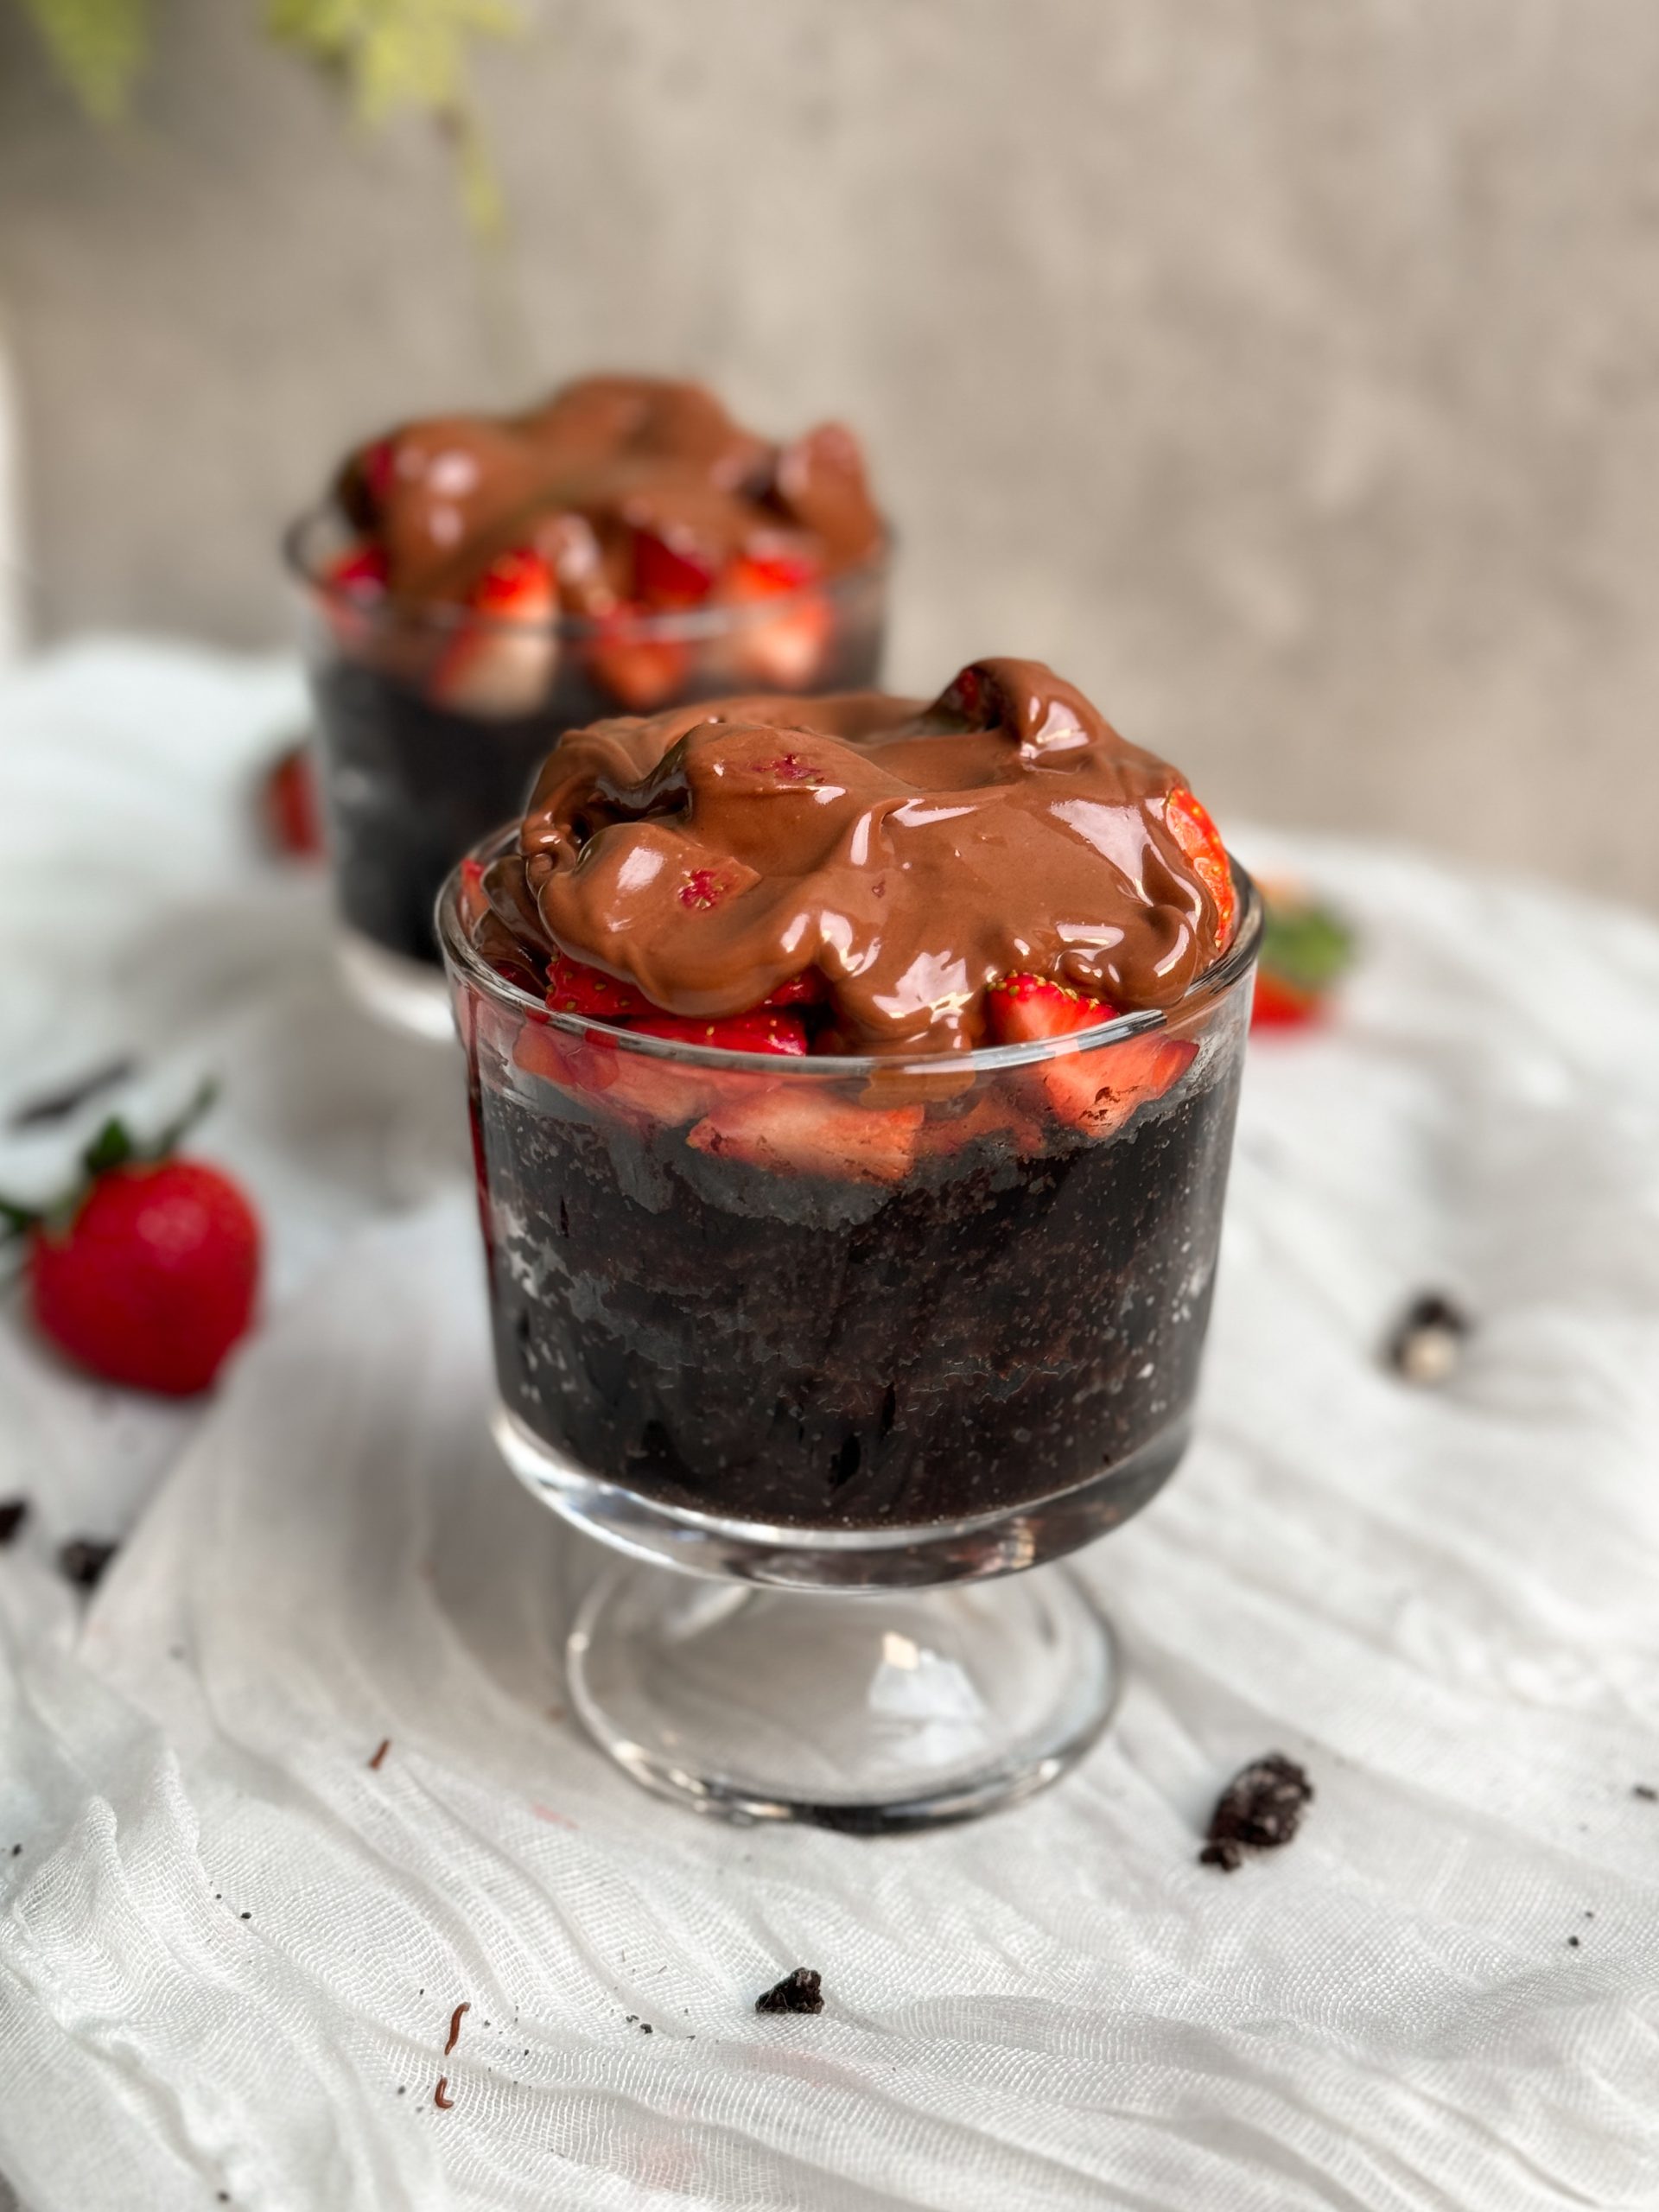 2 glass cups with chocolate strawberry mug cakes inside. moist chocolate cake topped with chopped strawberries and melted chocolate